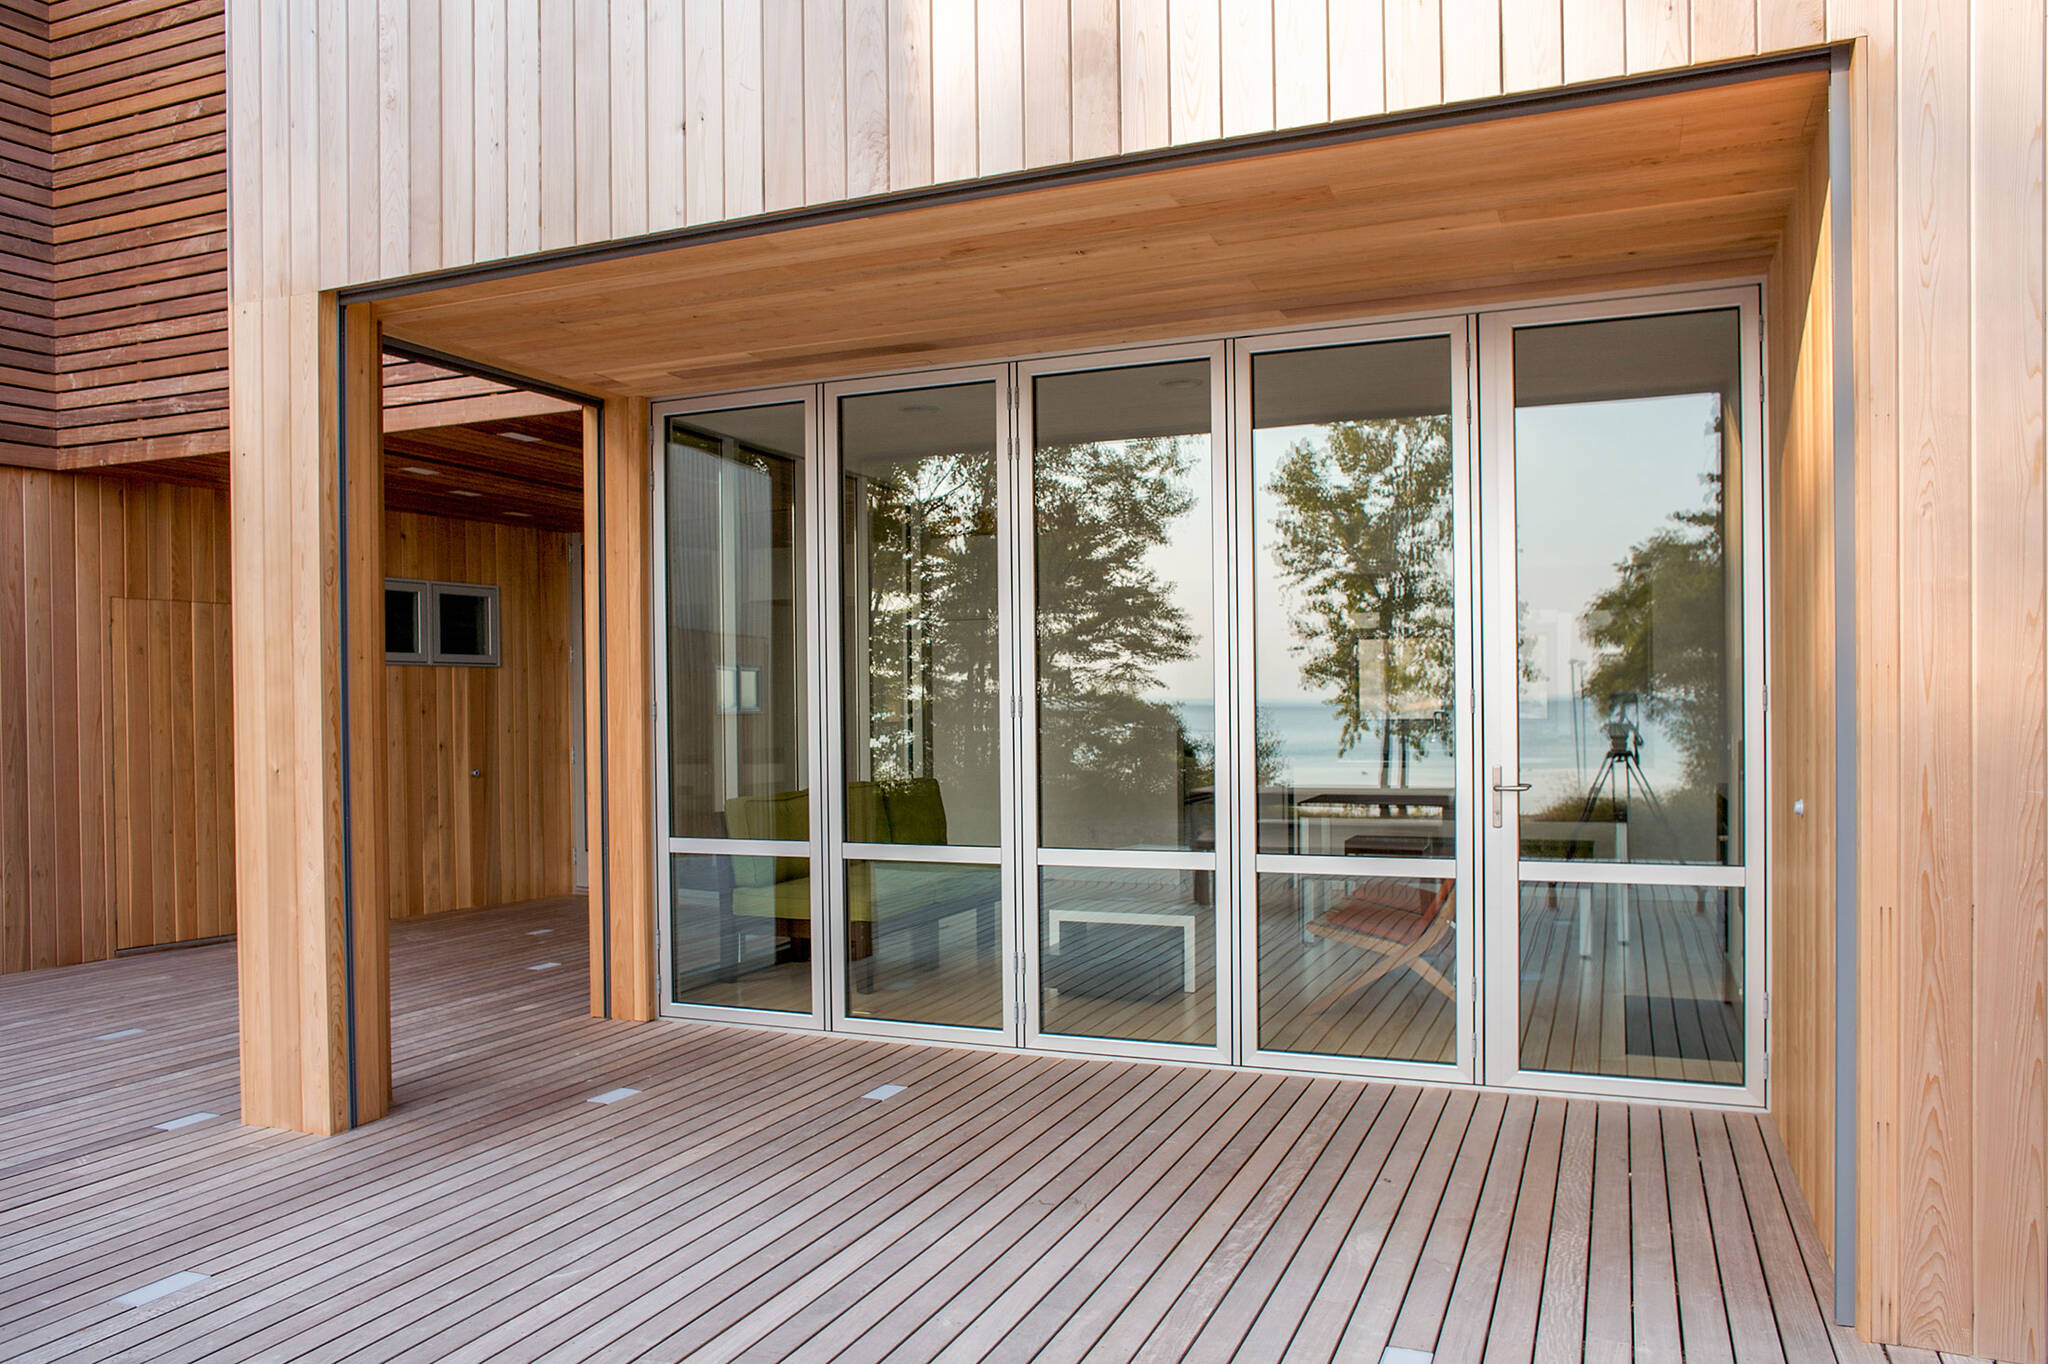 Deck folding doors sequence of the sustainable lake house project in Omena, Michigan designed by the architecture studio Danny Forster & Architecture